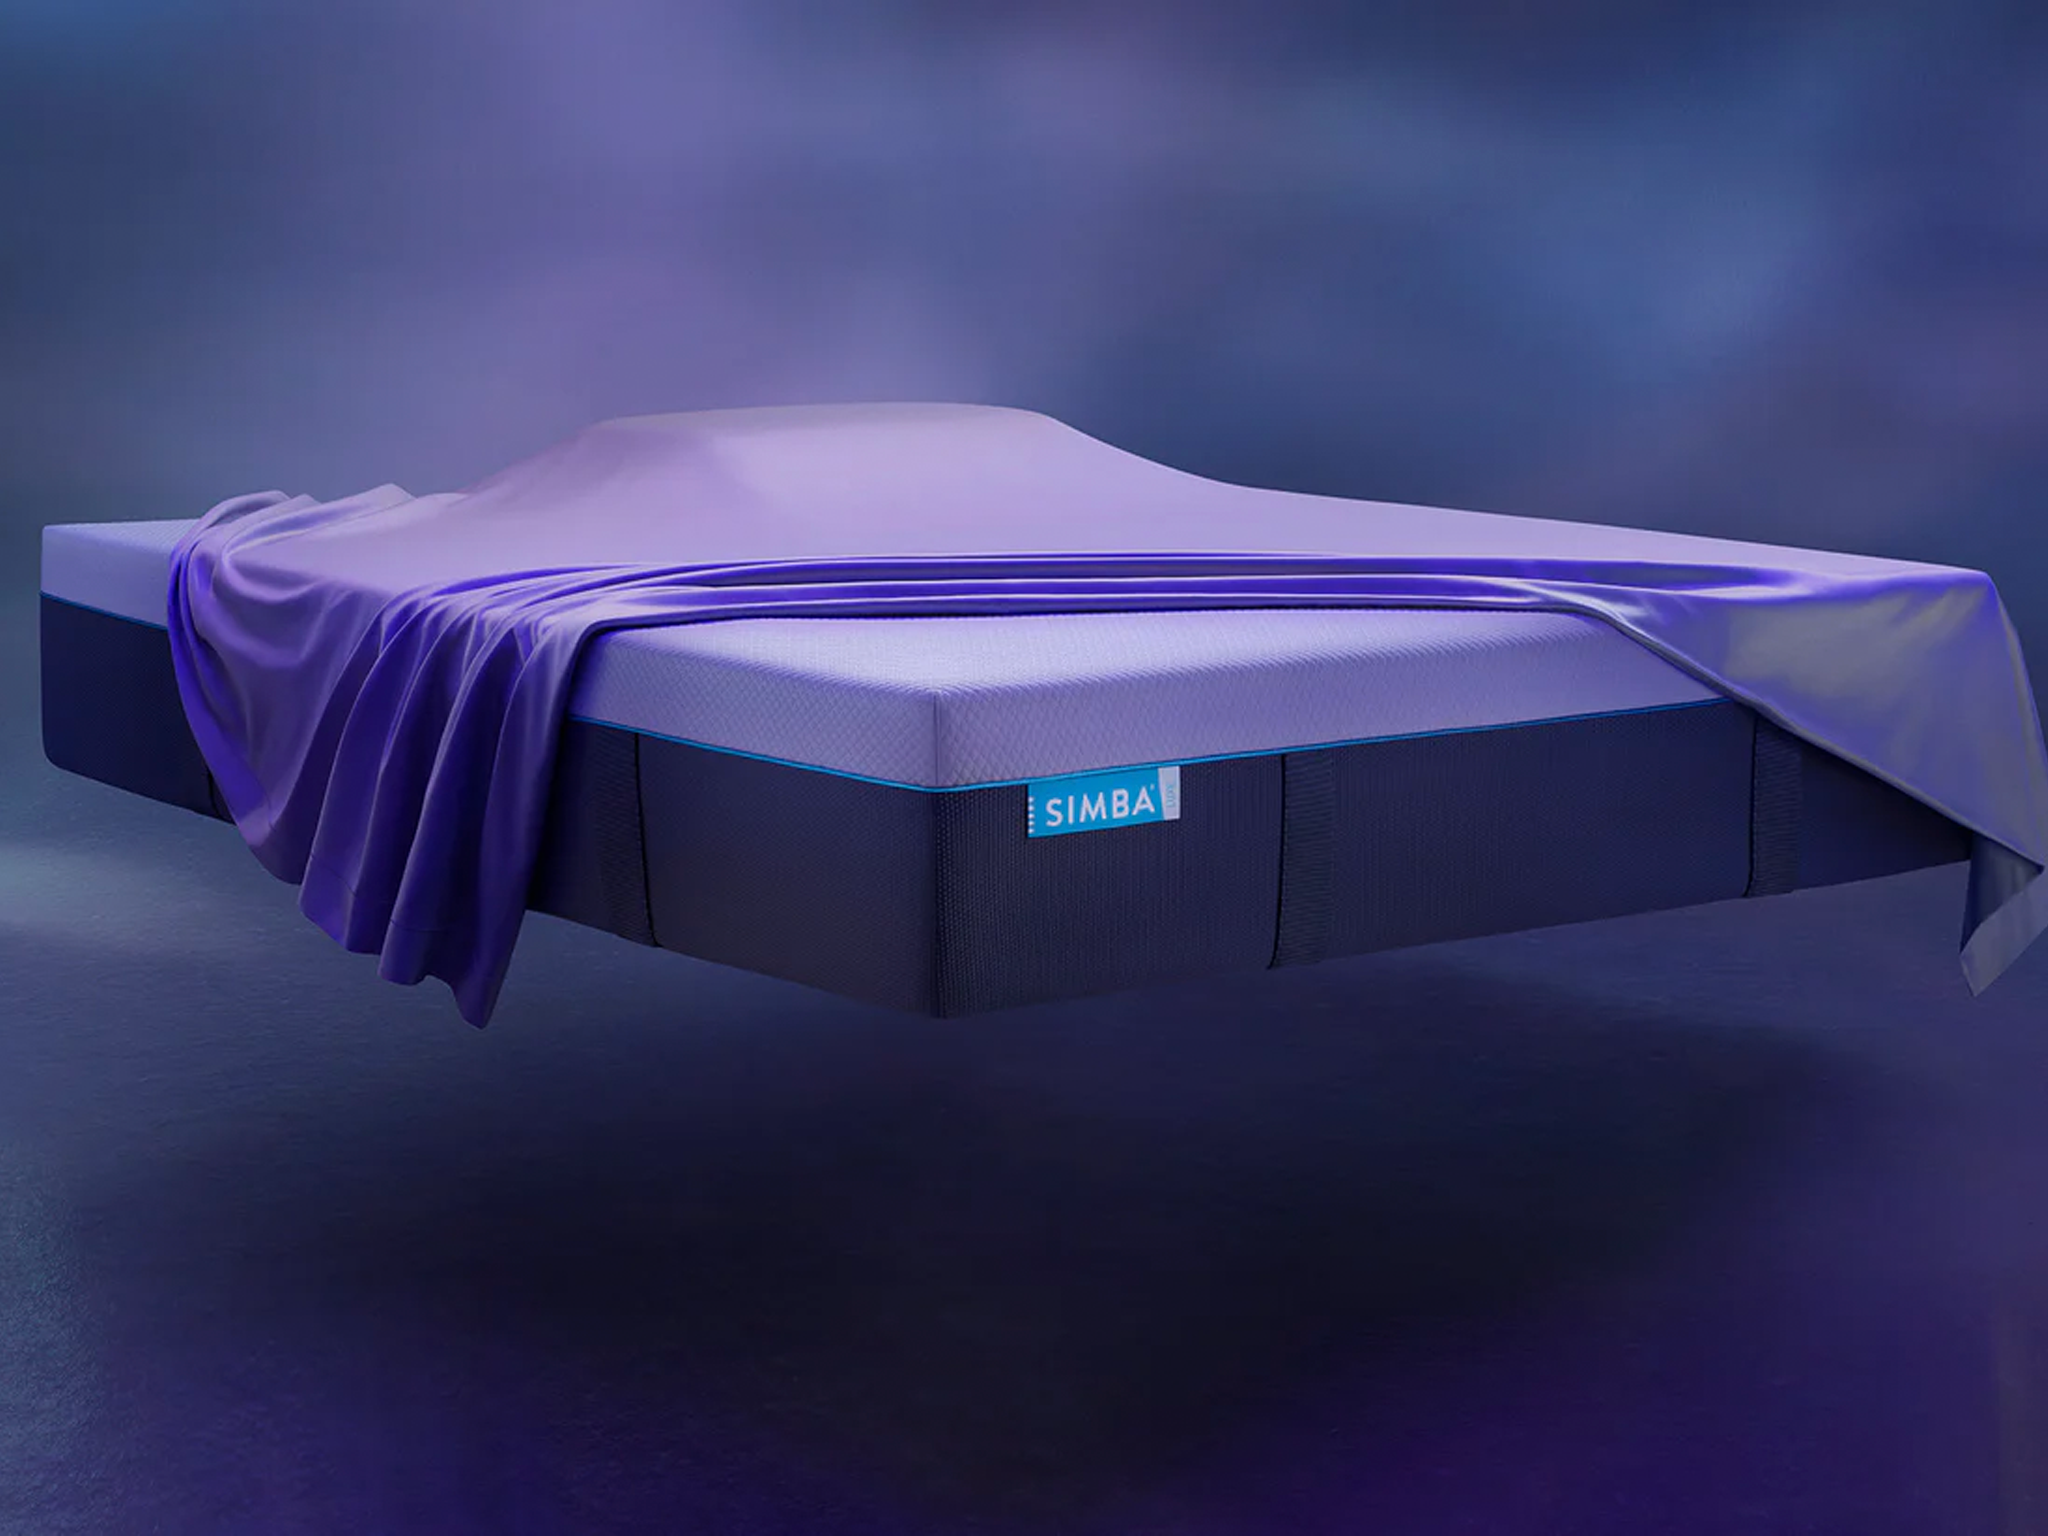 Simba hybrid luxe mattress review indybest